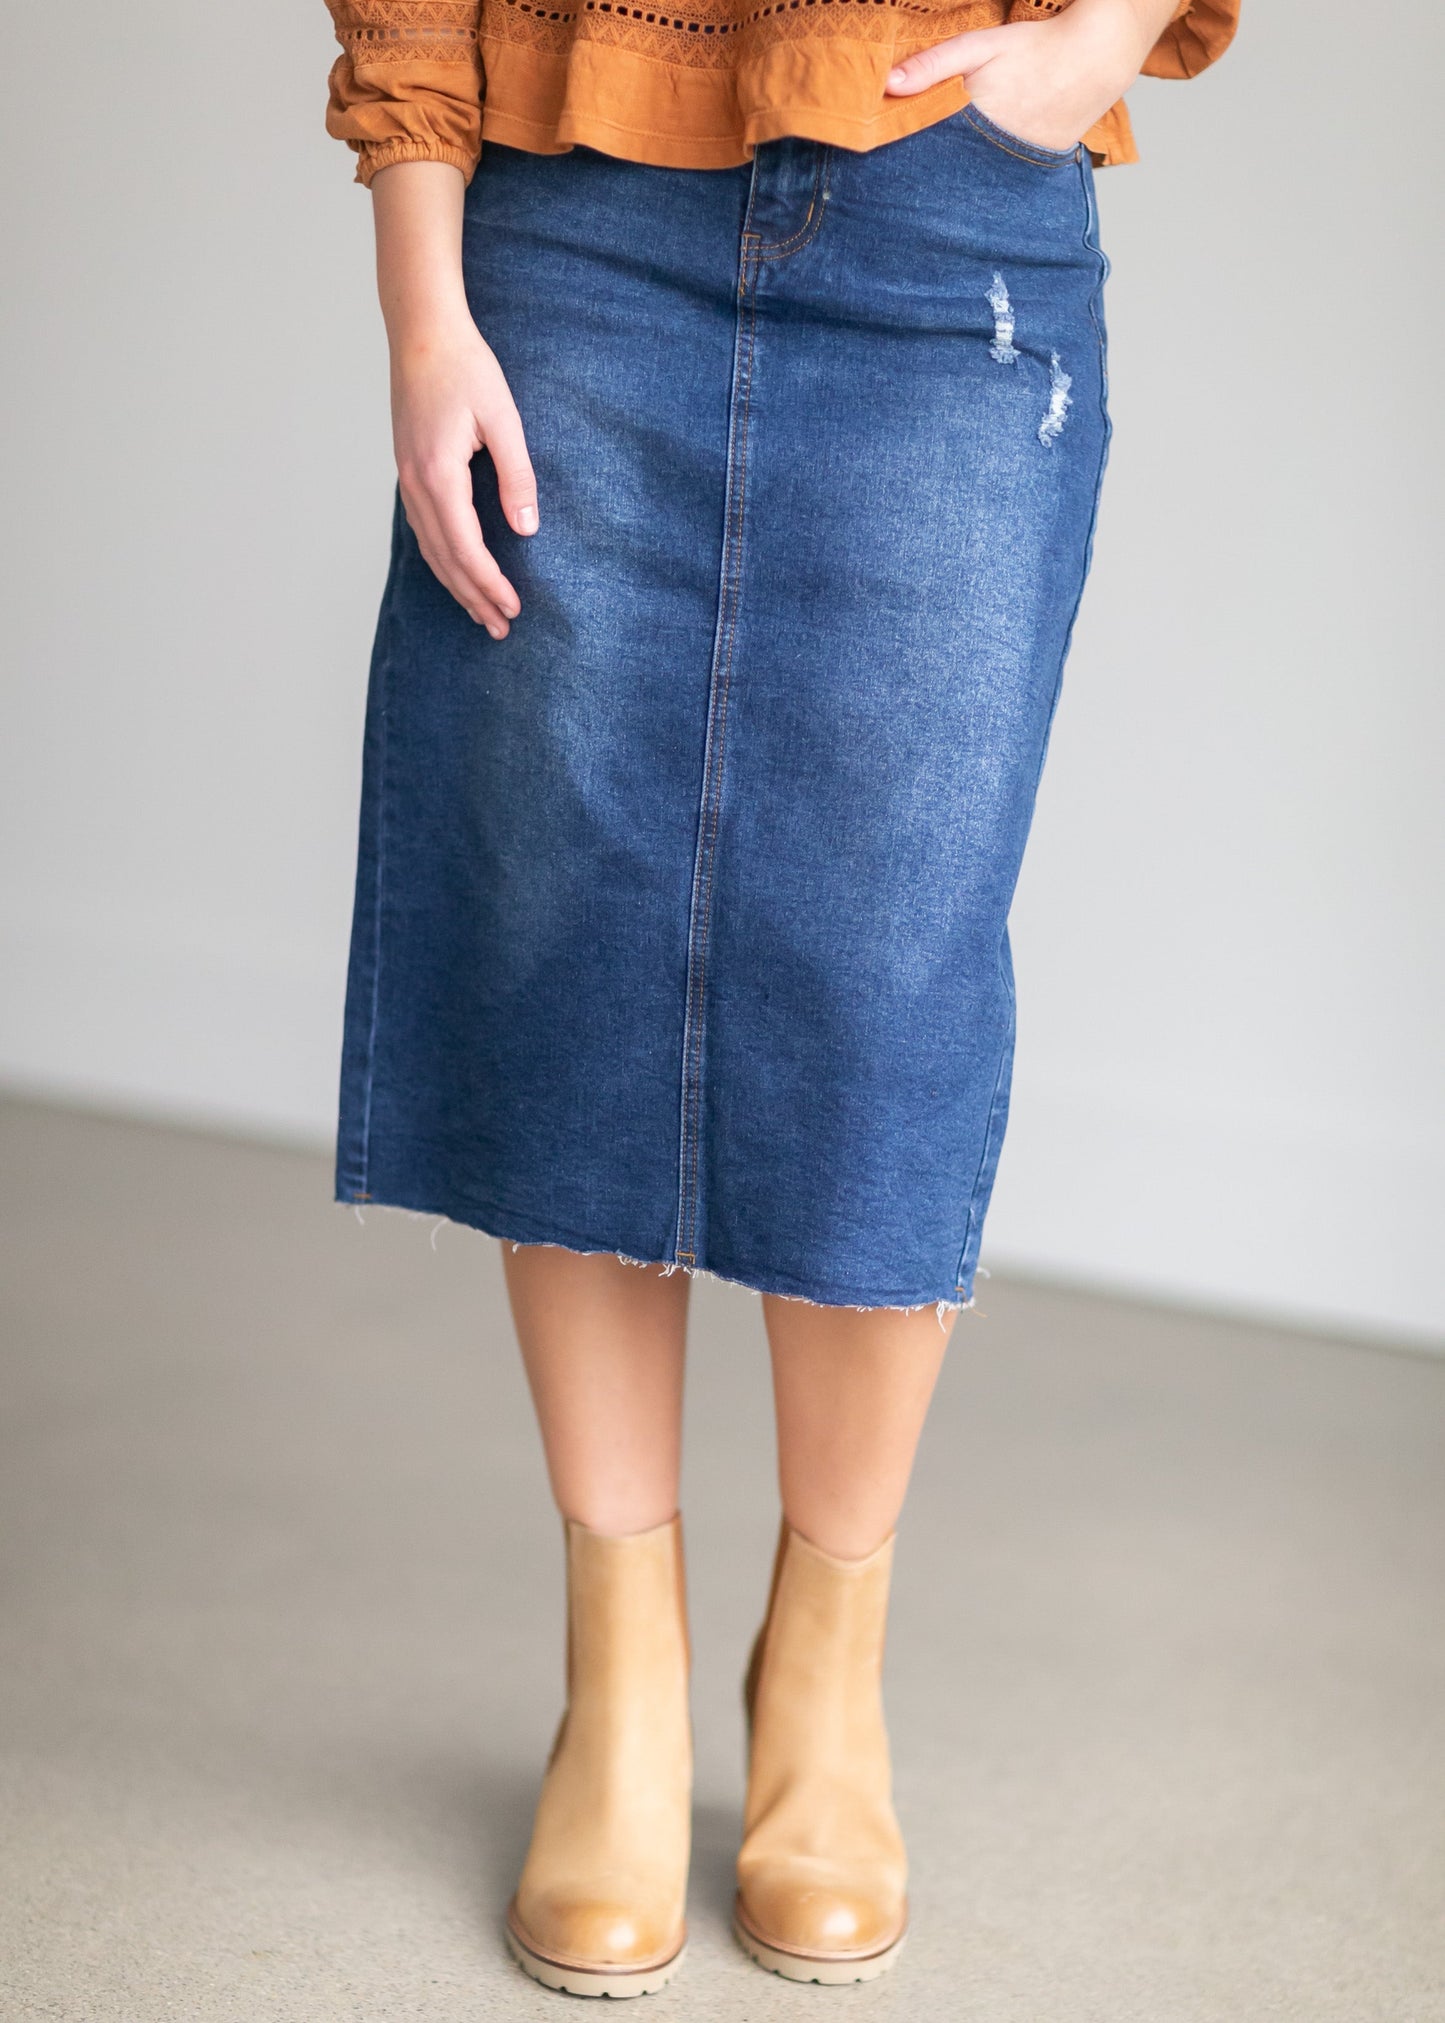 An Inherit Exclusive, the Remi Raw Hem Dark Denim Midi Skirt is cut with a modest and classic straight fit. This dark denim skirt has a raw bottom hem and will be a go-to time and time again for any occasion! The slight distressing at the hip adds fun style to your closet without any thought at being dressy or casual as it is definitely both! This skirt has awesome stretch for total comfort and no back slit while still allowing for unconstrained walking.